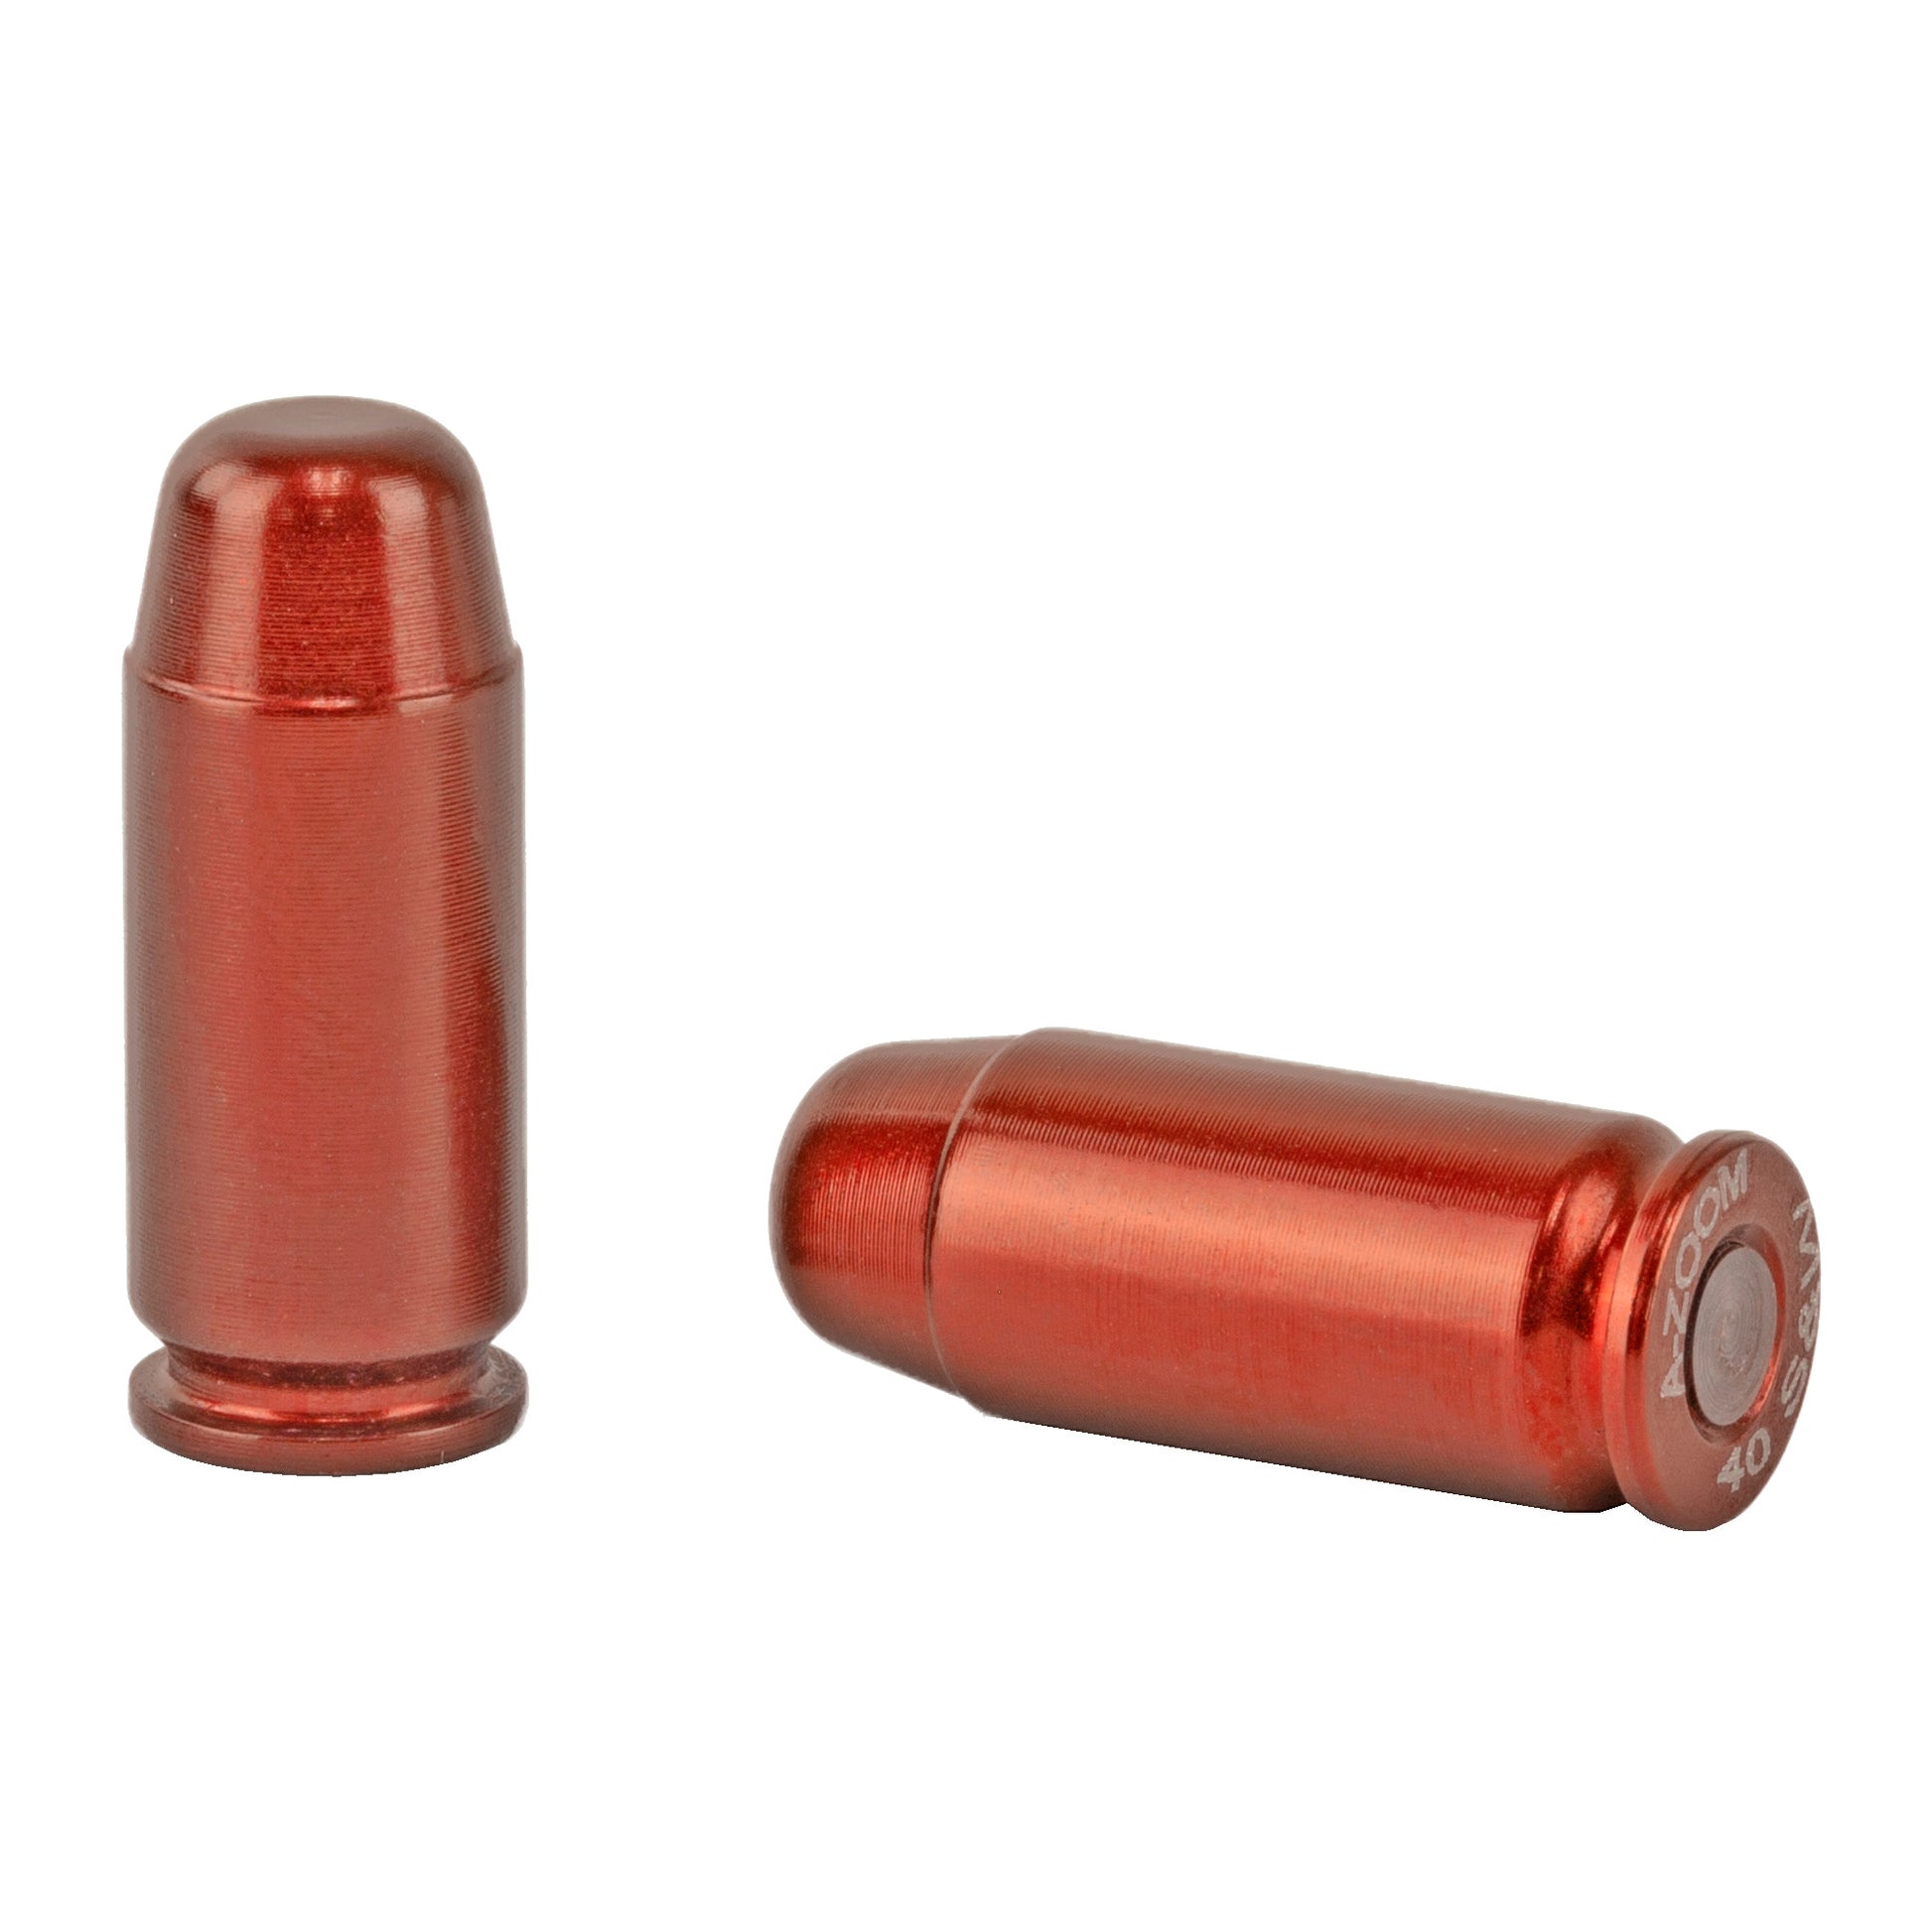 A-Zoom Snap Caps safety training 40 S&W 5 Pack solid aluminum 15114 - California Shooting Supplies